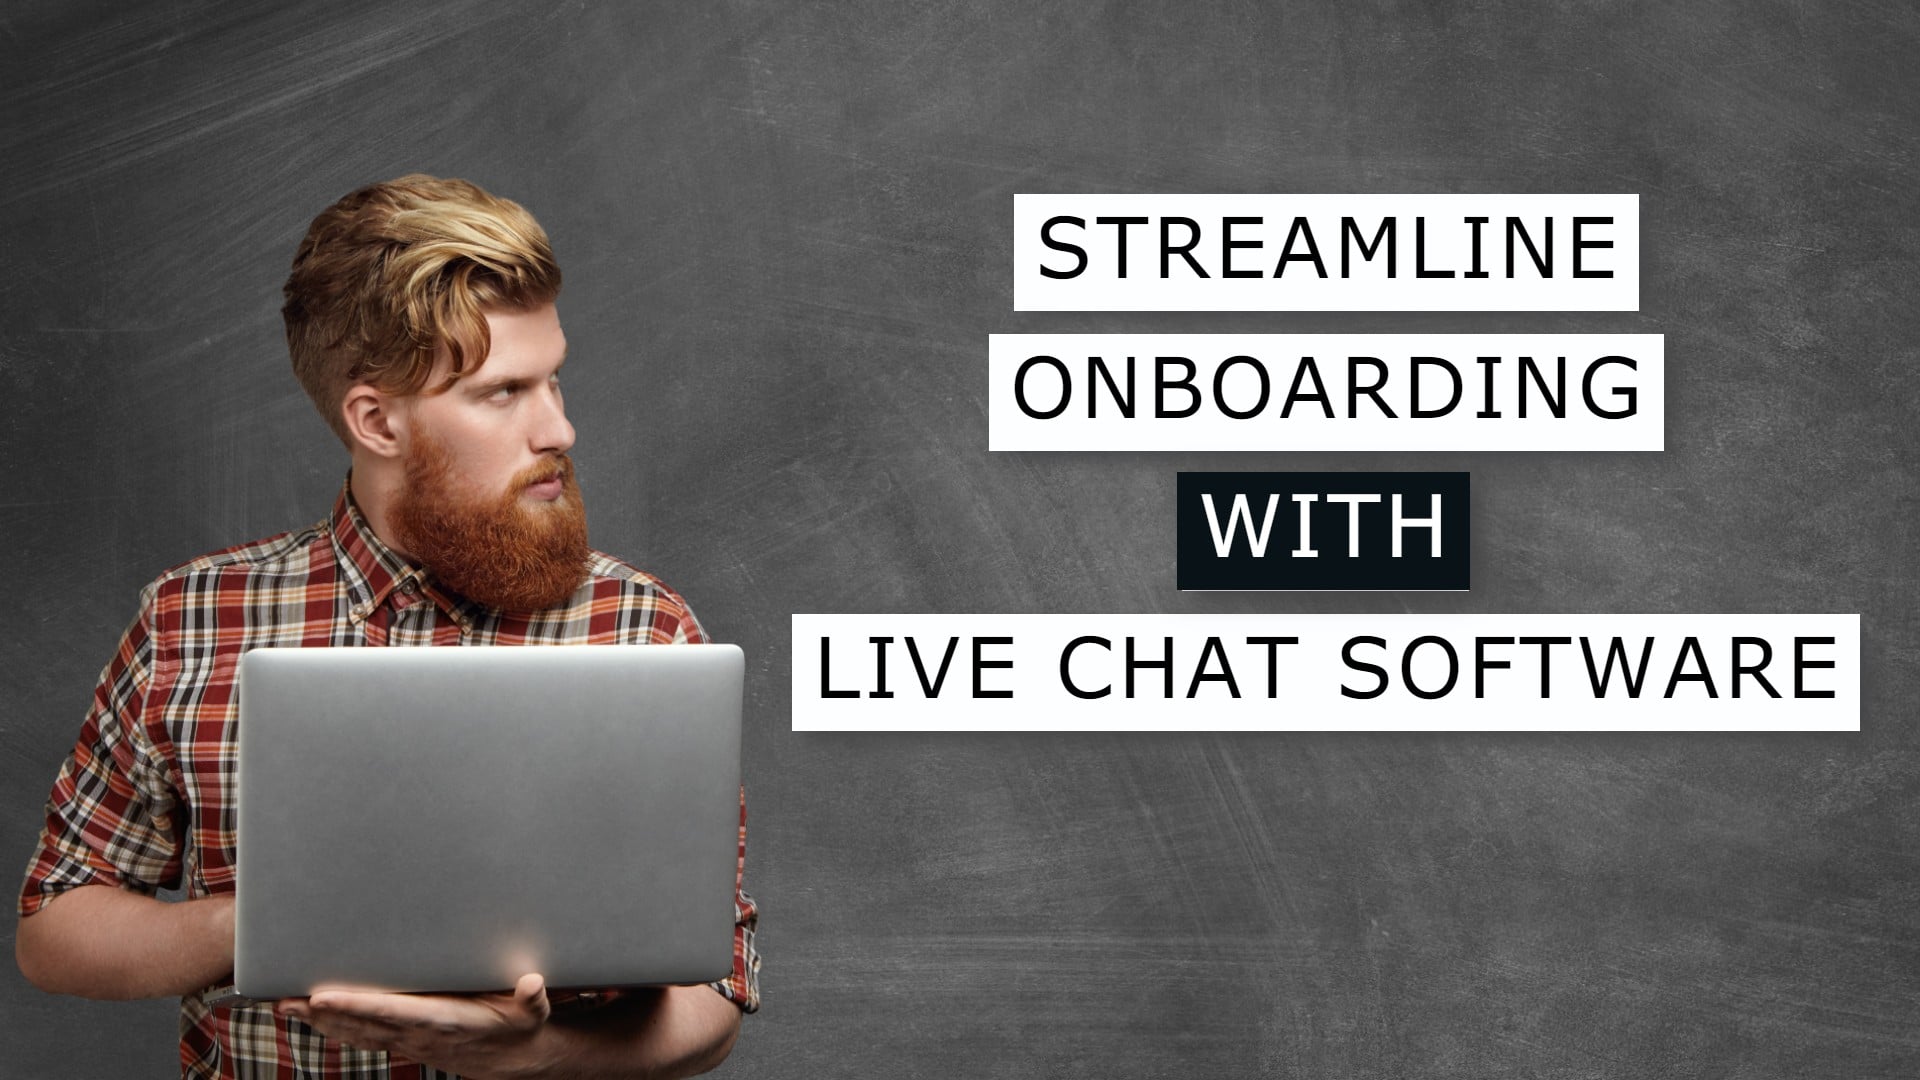 How to Streamline Your Onboarding Process with Live Chat Software